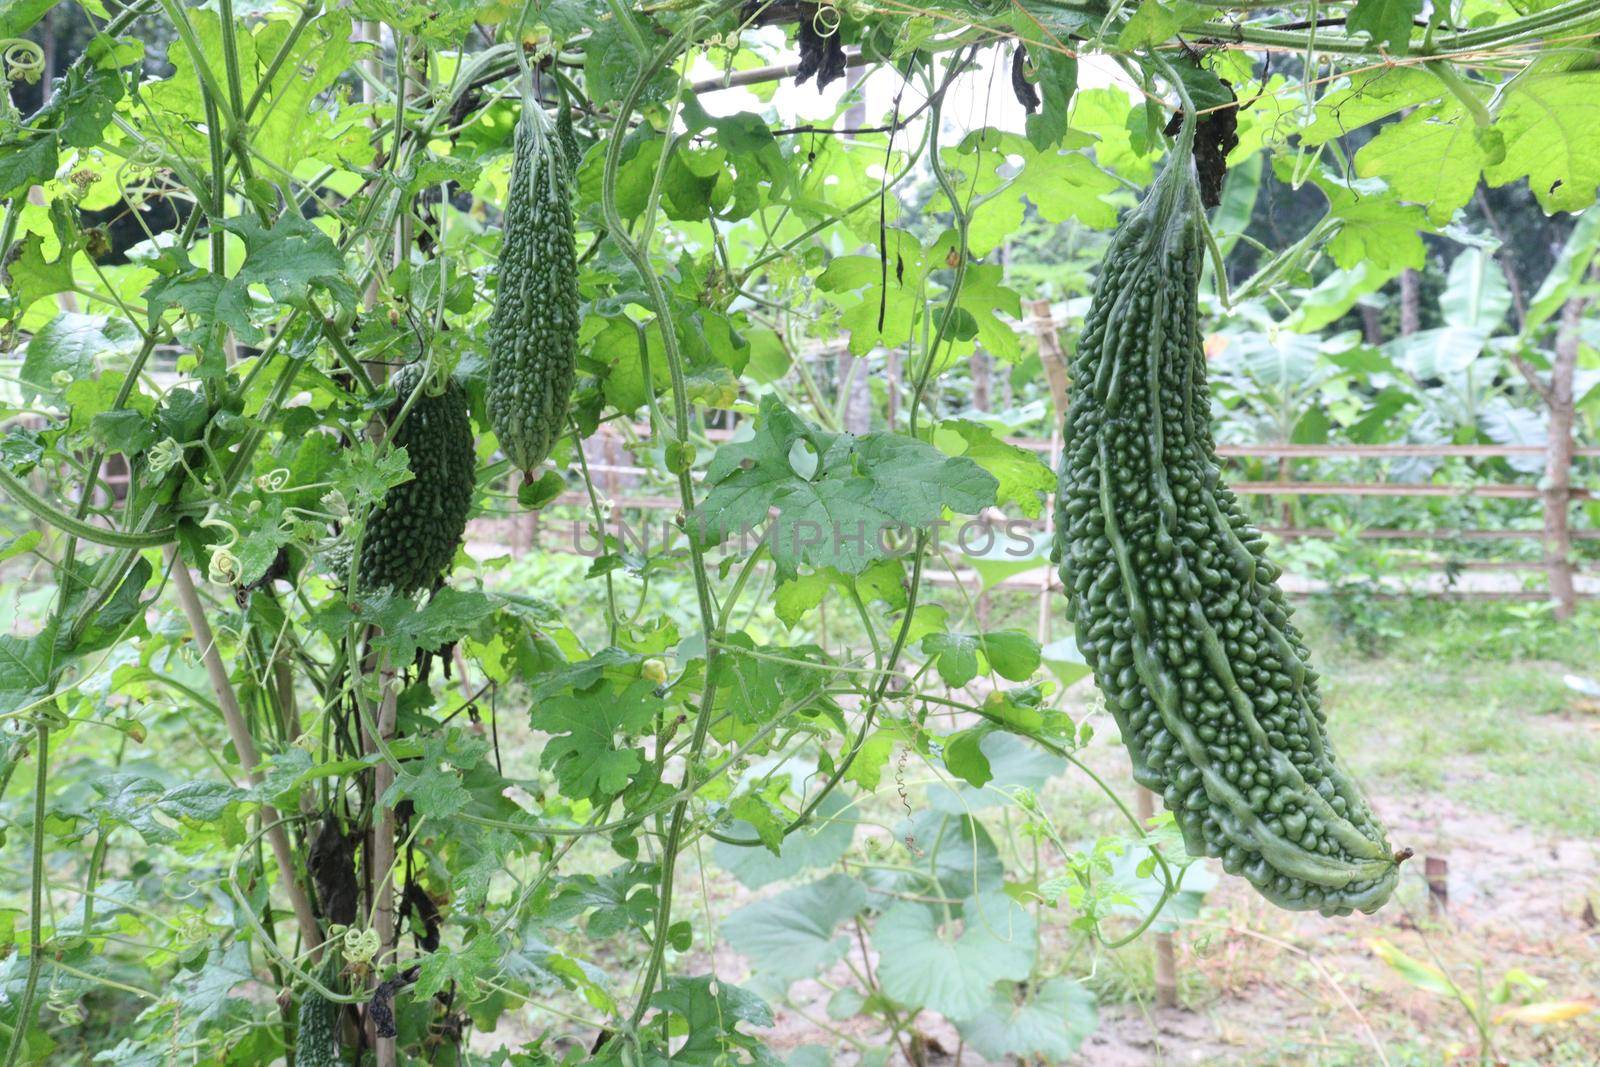 healthy raw bitter melon on tree in farm for harvest